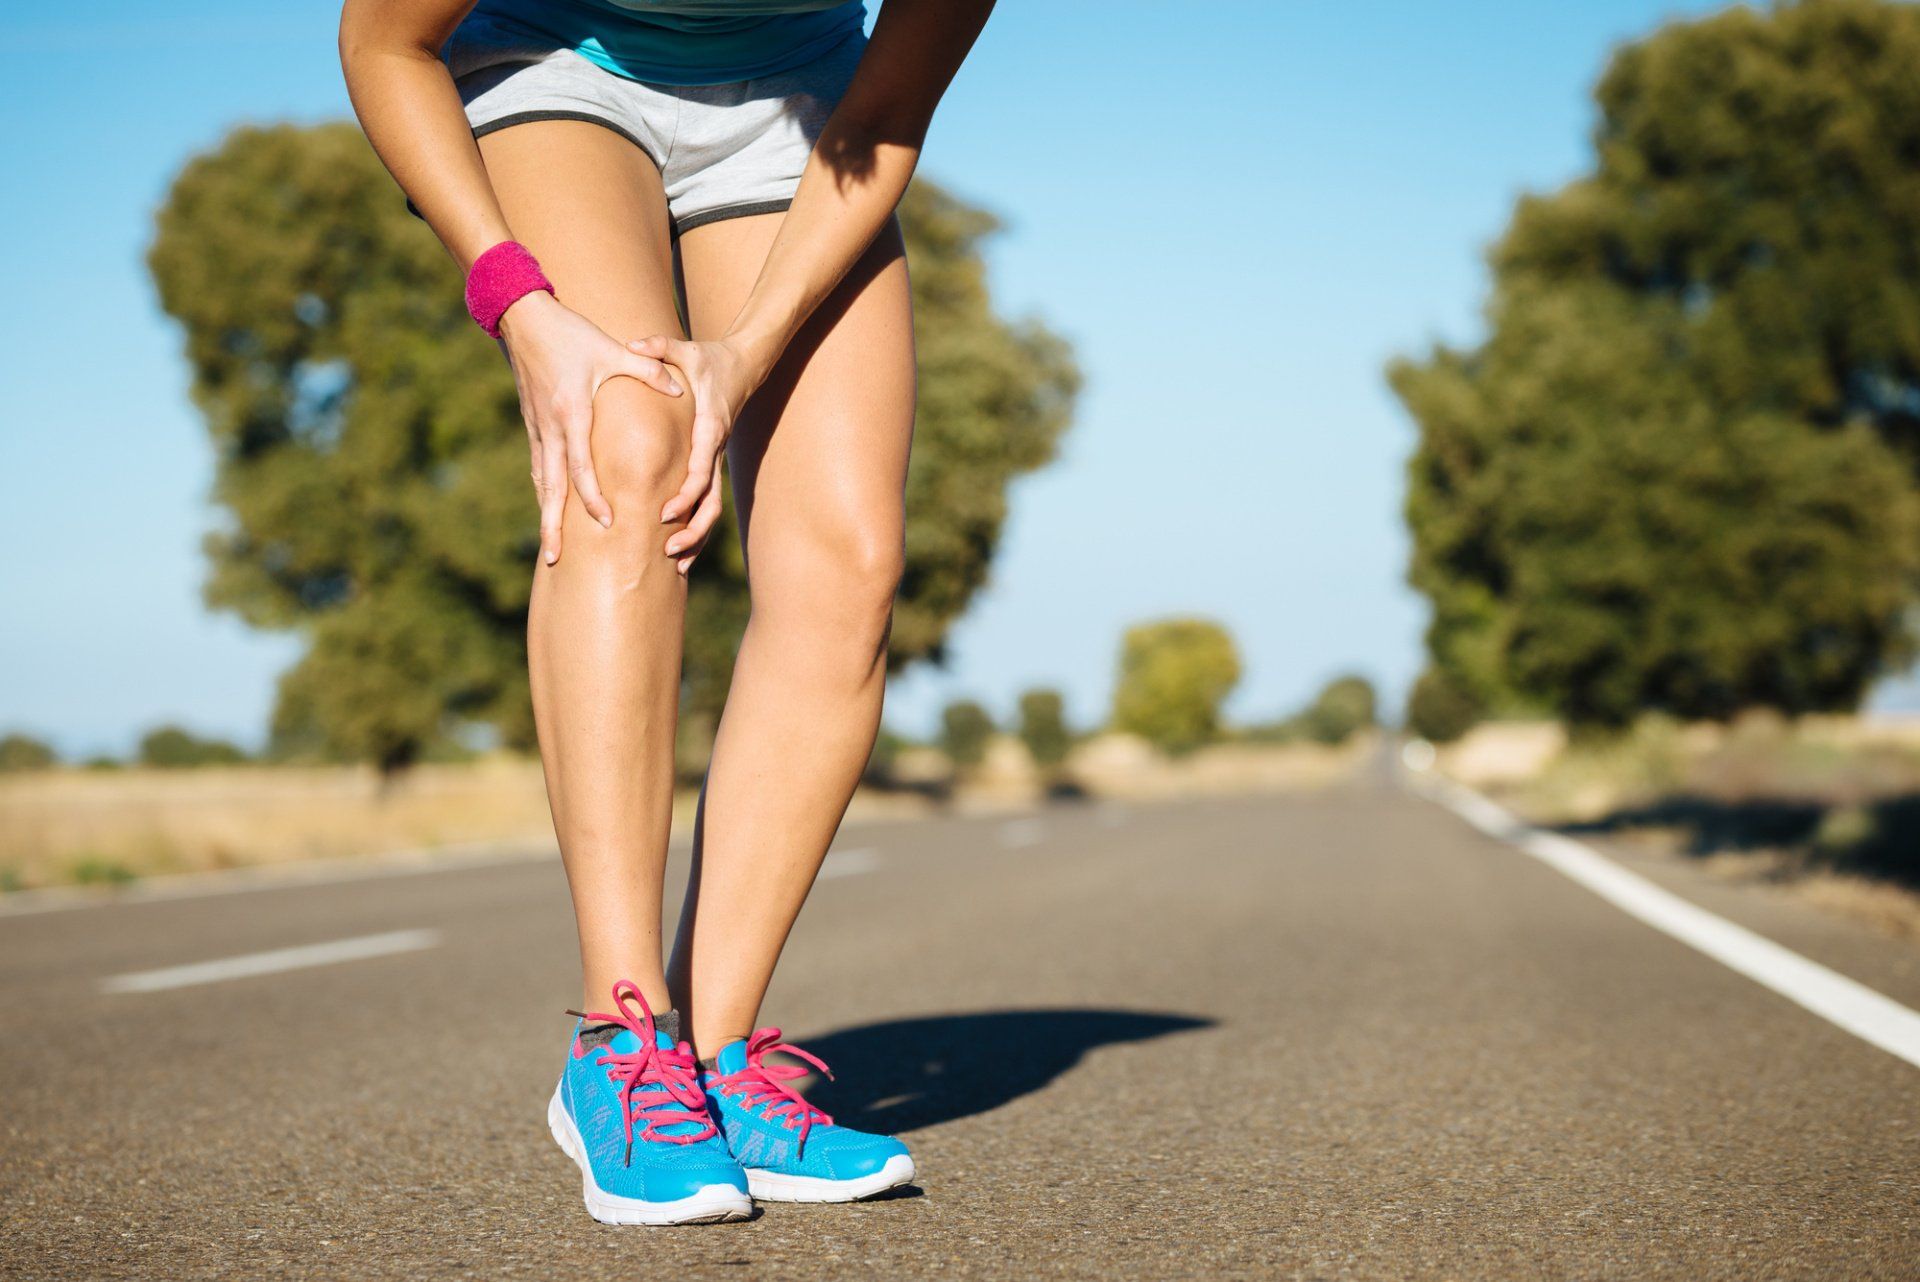 The ACL Tear: Risk Factors, Prevention, and Recovery